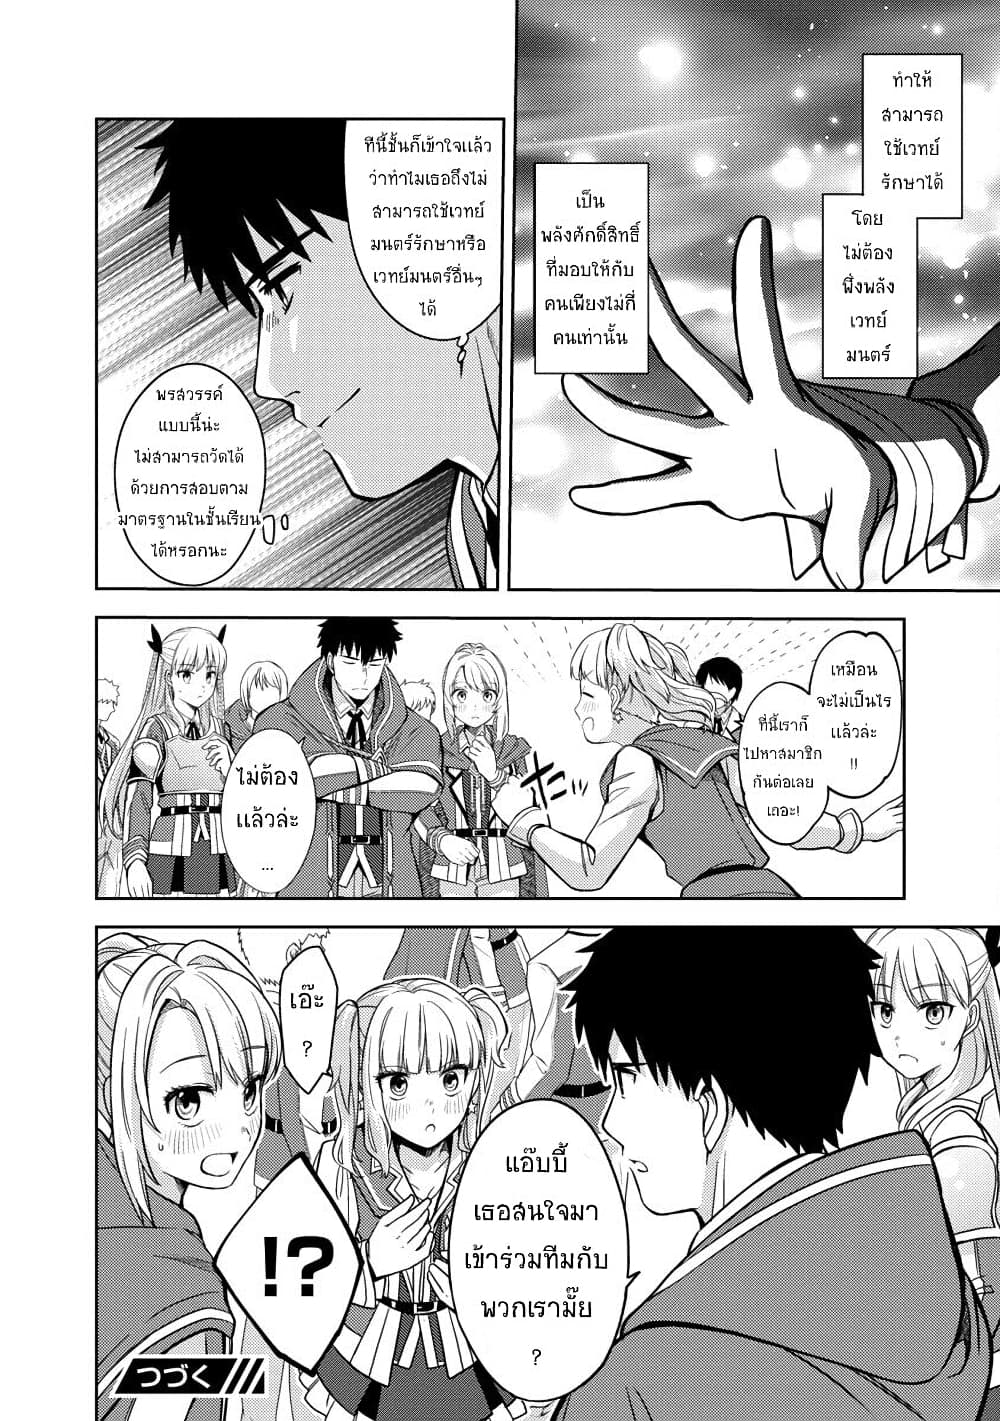 The Reincarnated Swordsman With 9999 Strength Wants to Become a Magician! ตอนที่ 5 (26)